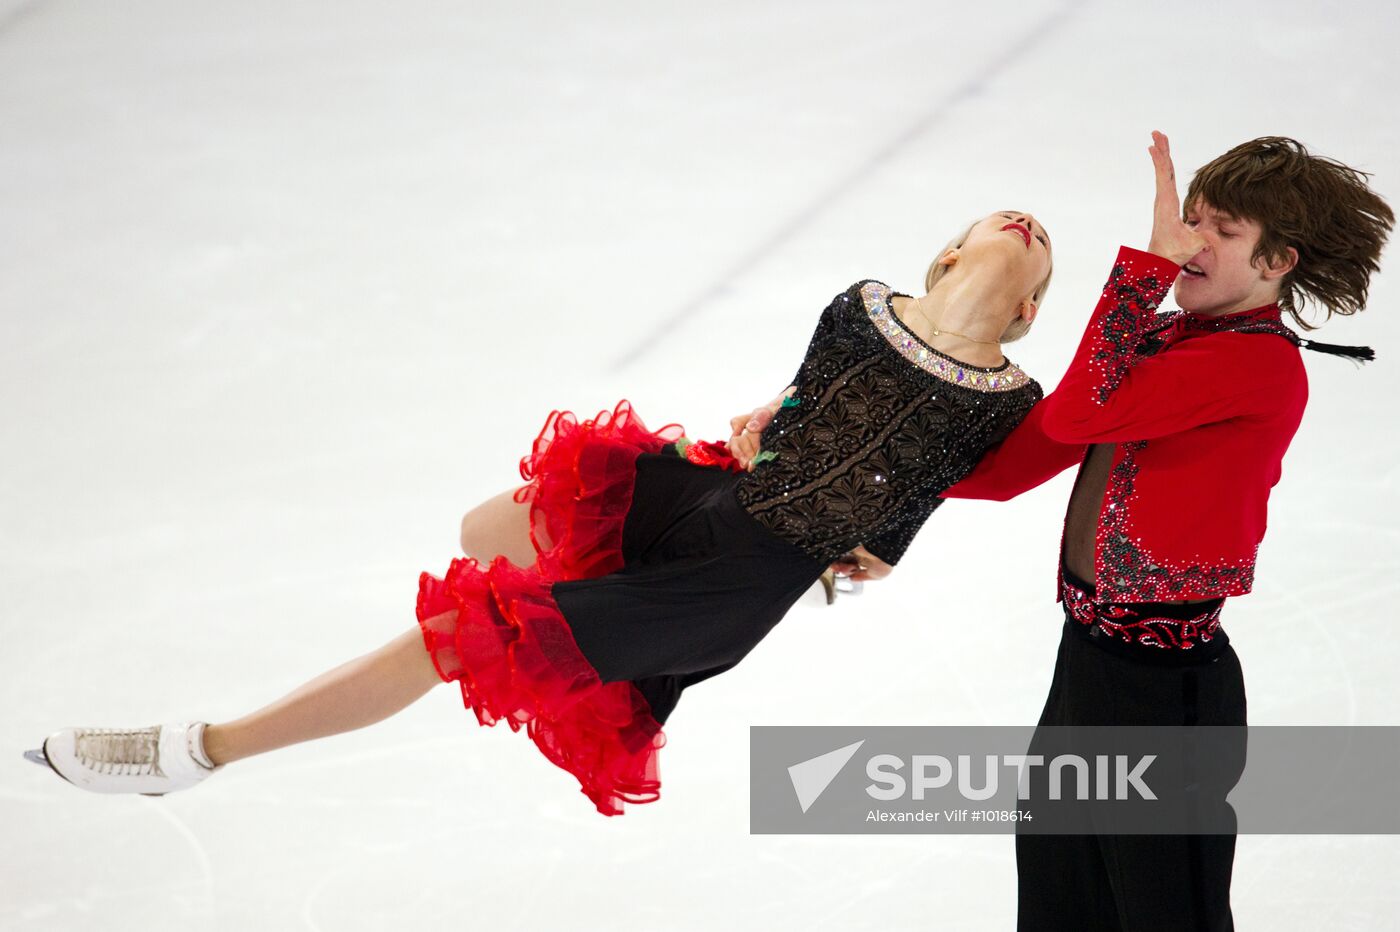 2012 Winter Youth Olympic Games. Figure skating